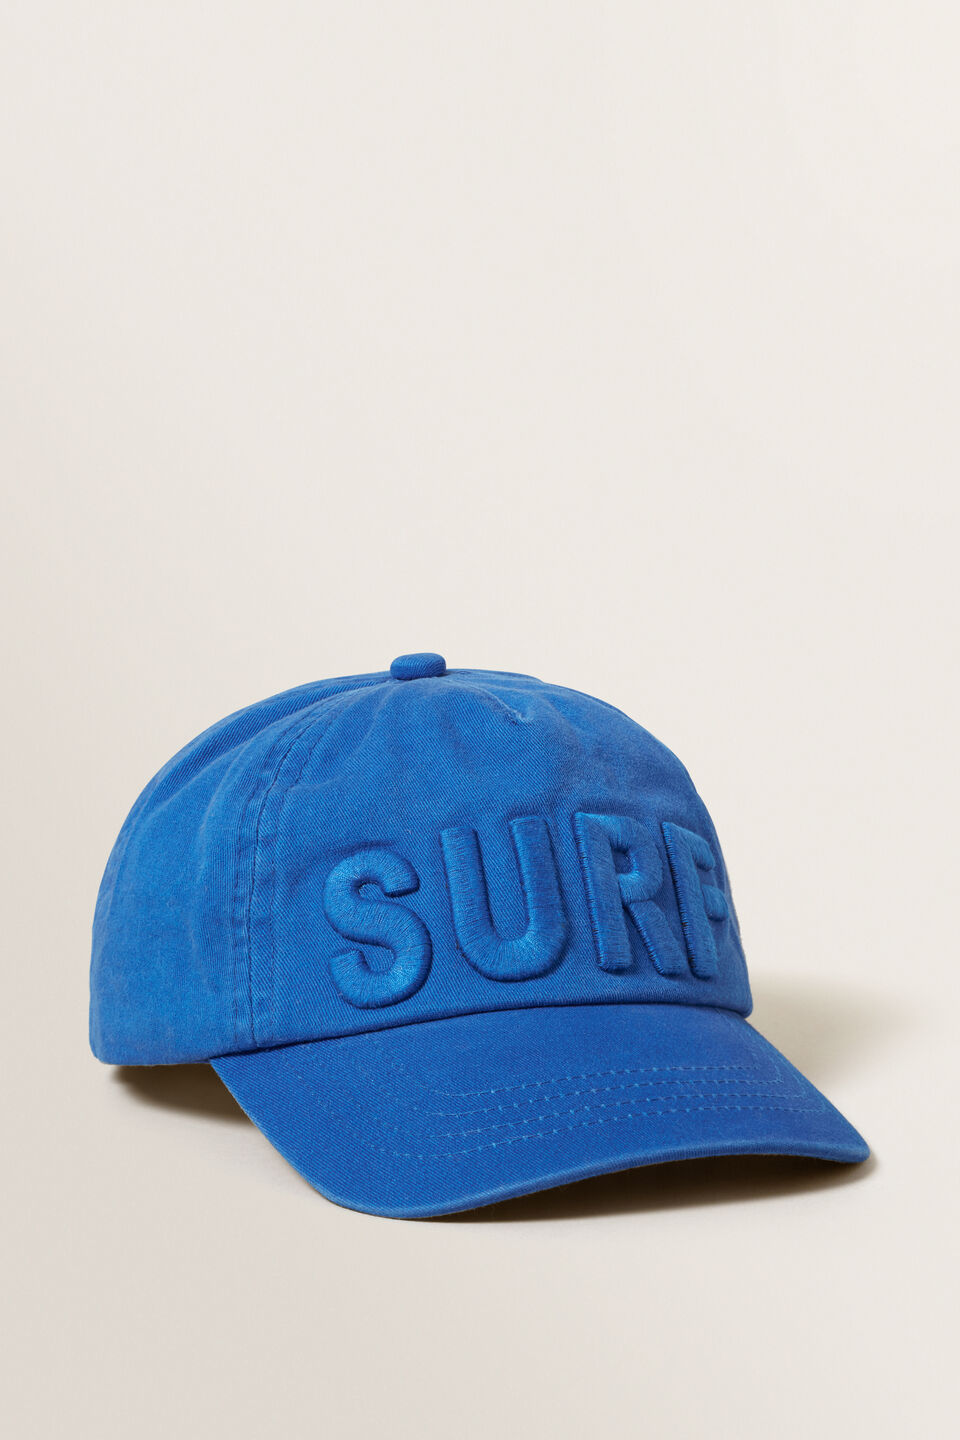 Surf Embroidery Cap  